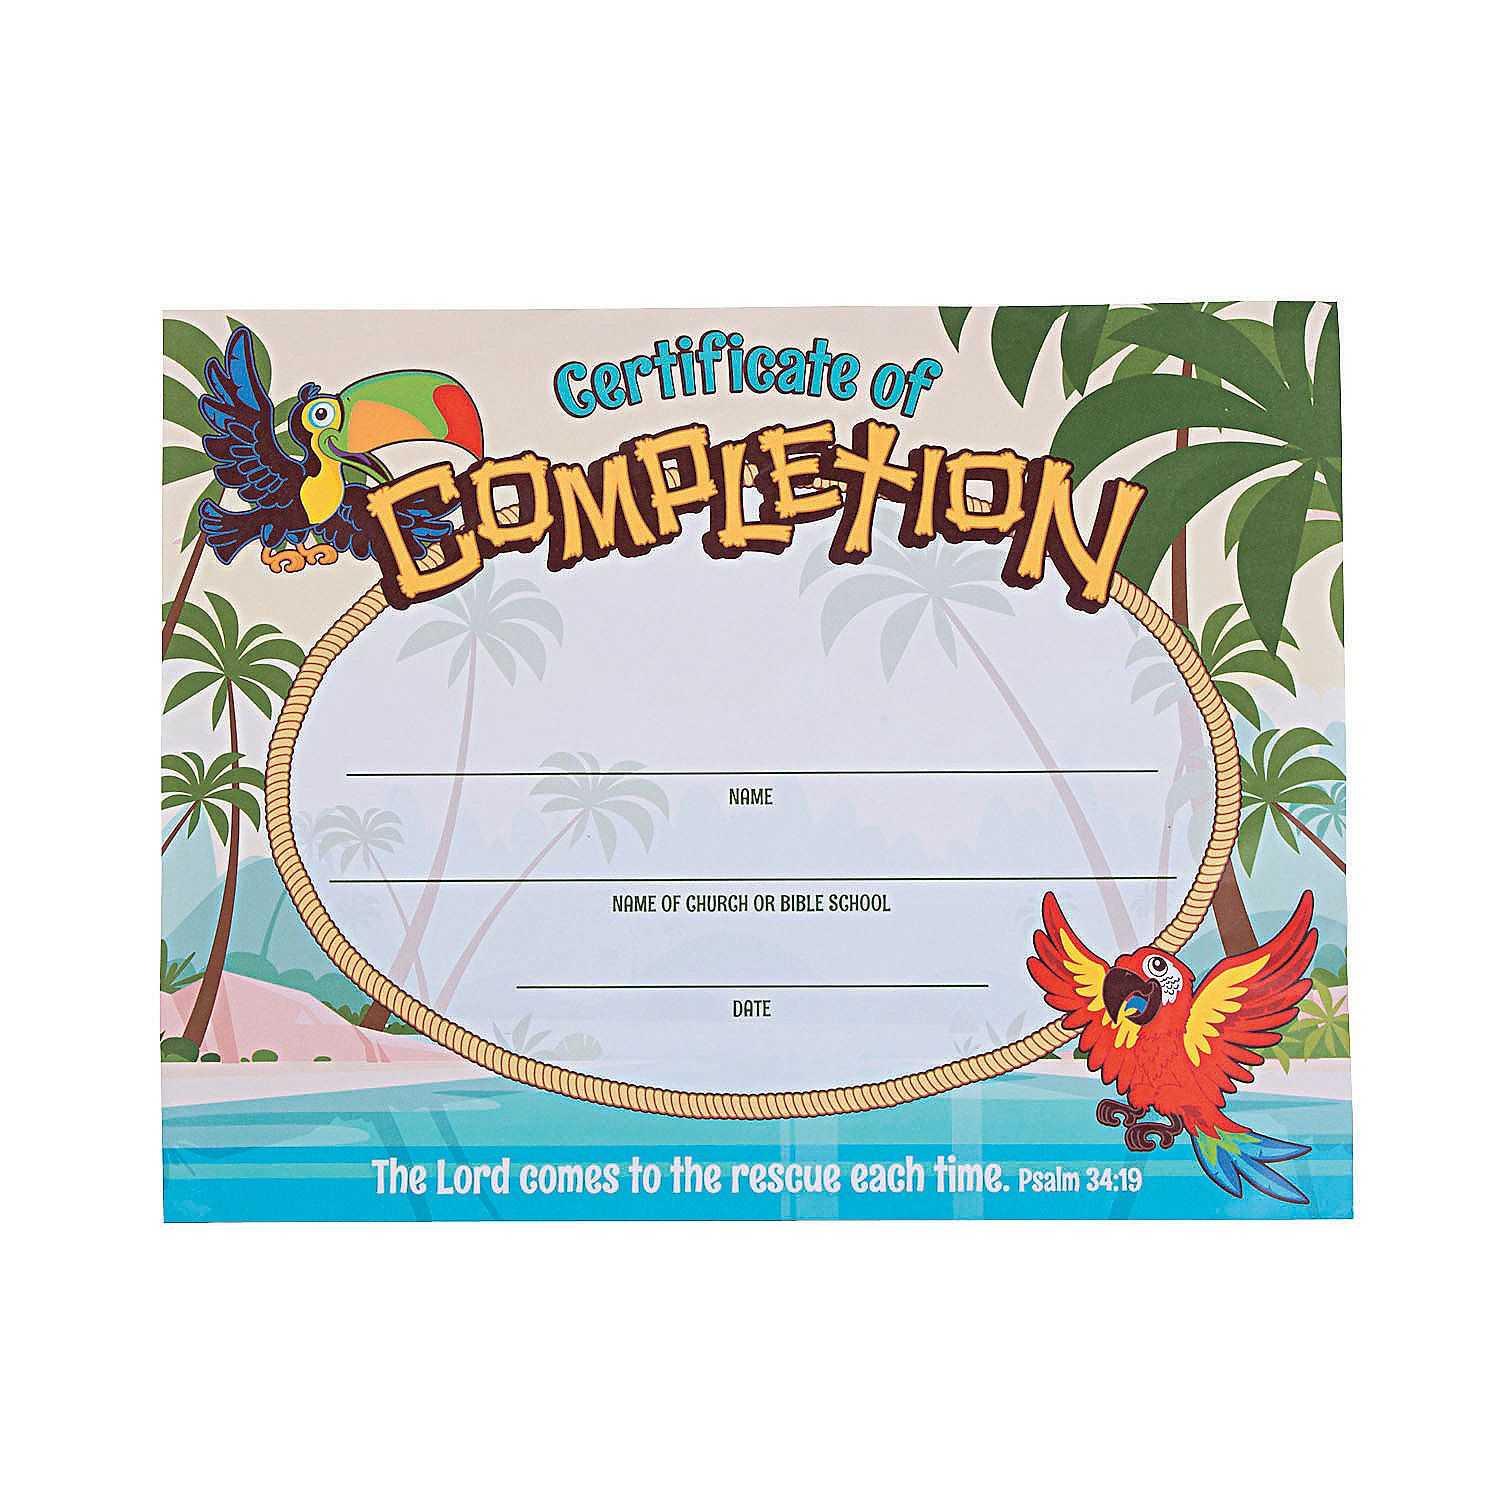 Island Vbs Certificates Of Completion | Stuff I Designed For Regarding Free Vbs Certificate Templates